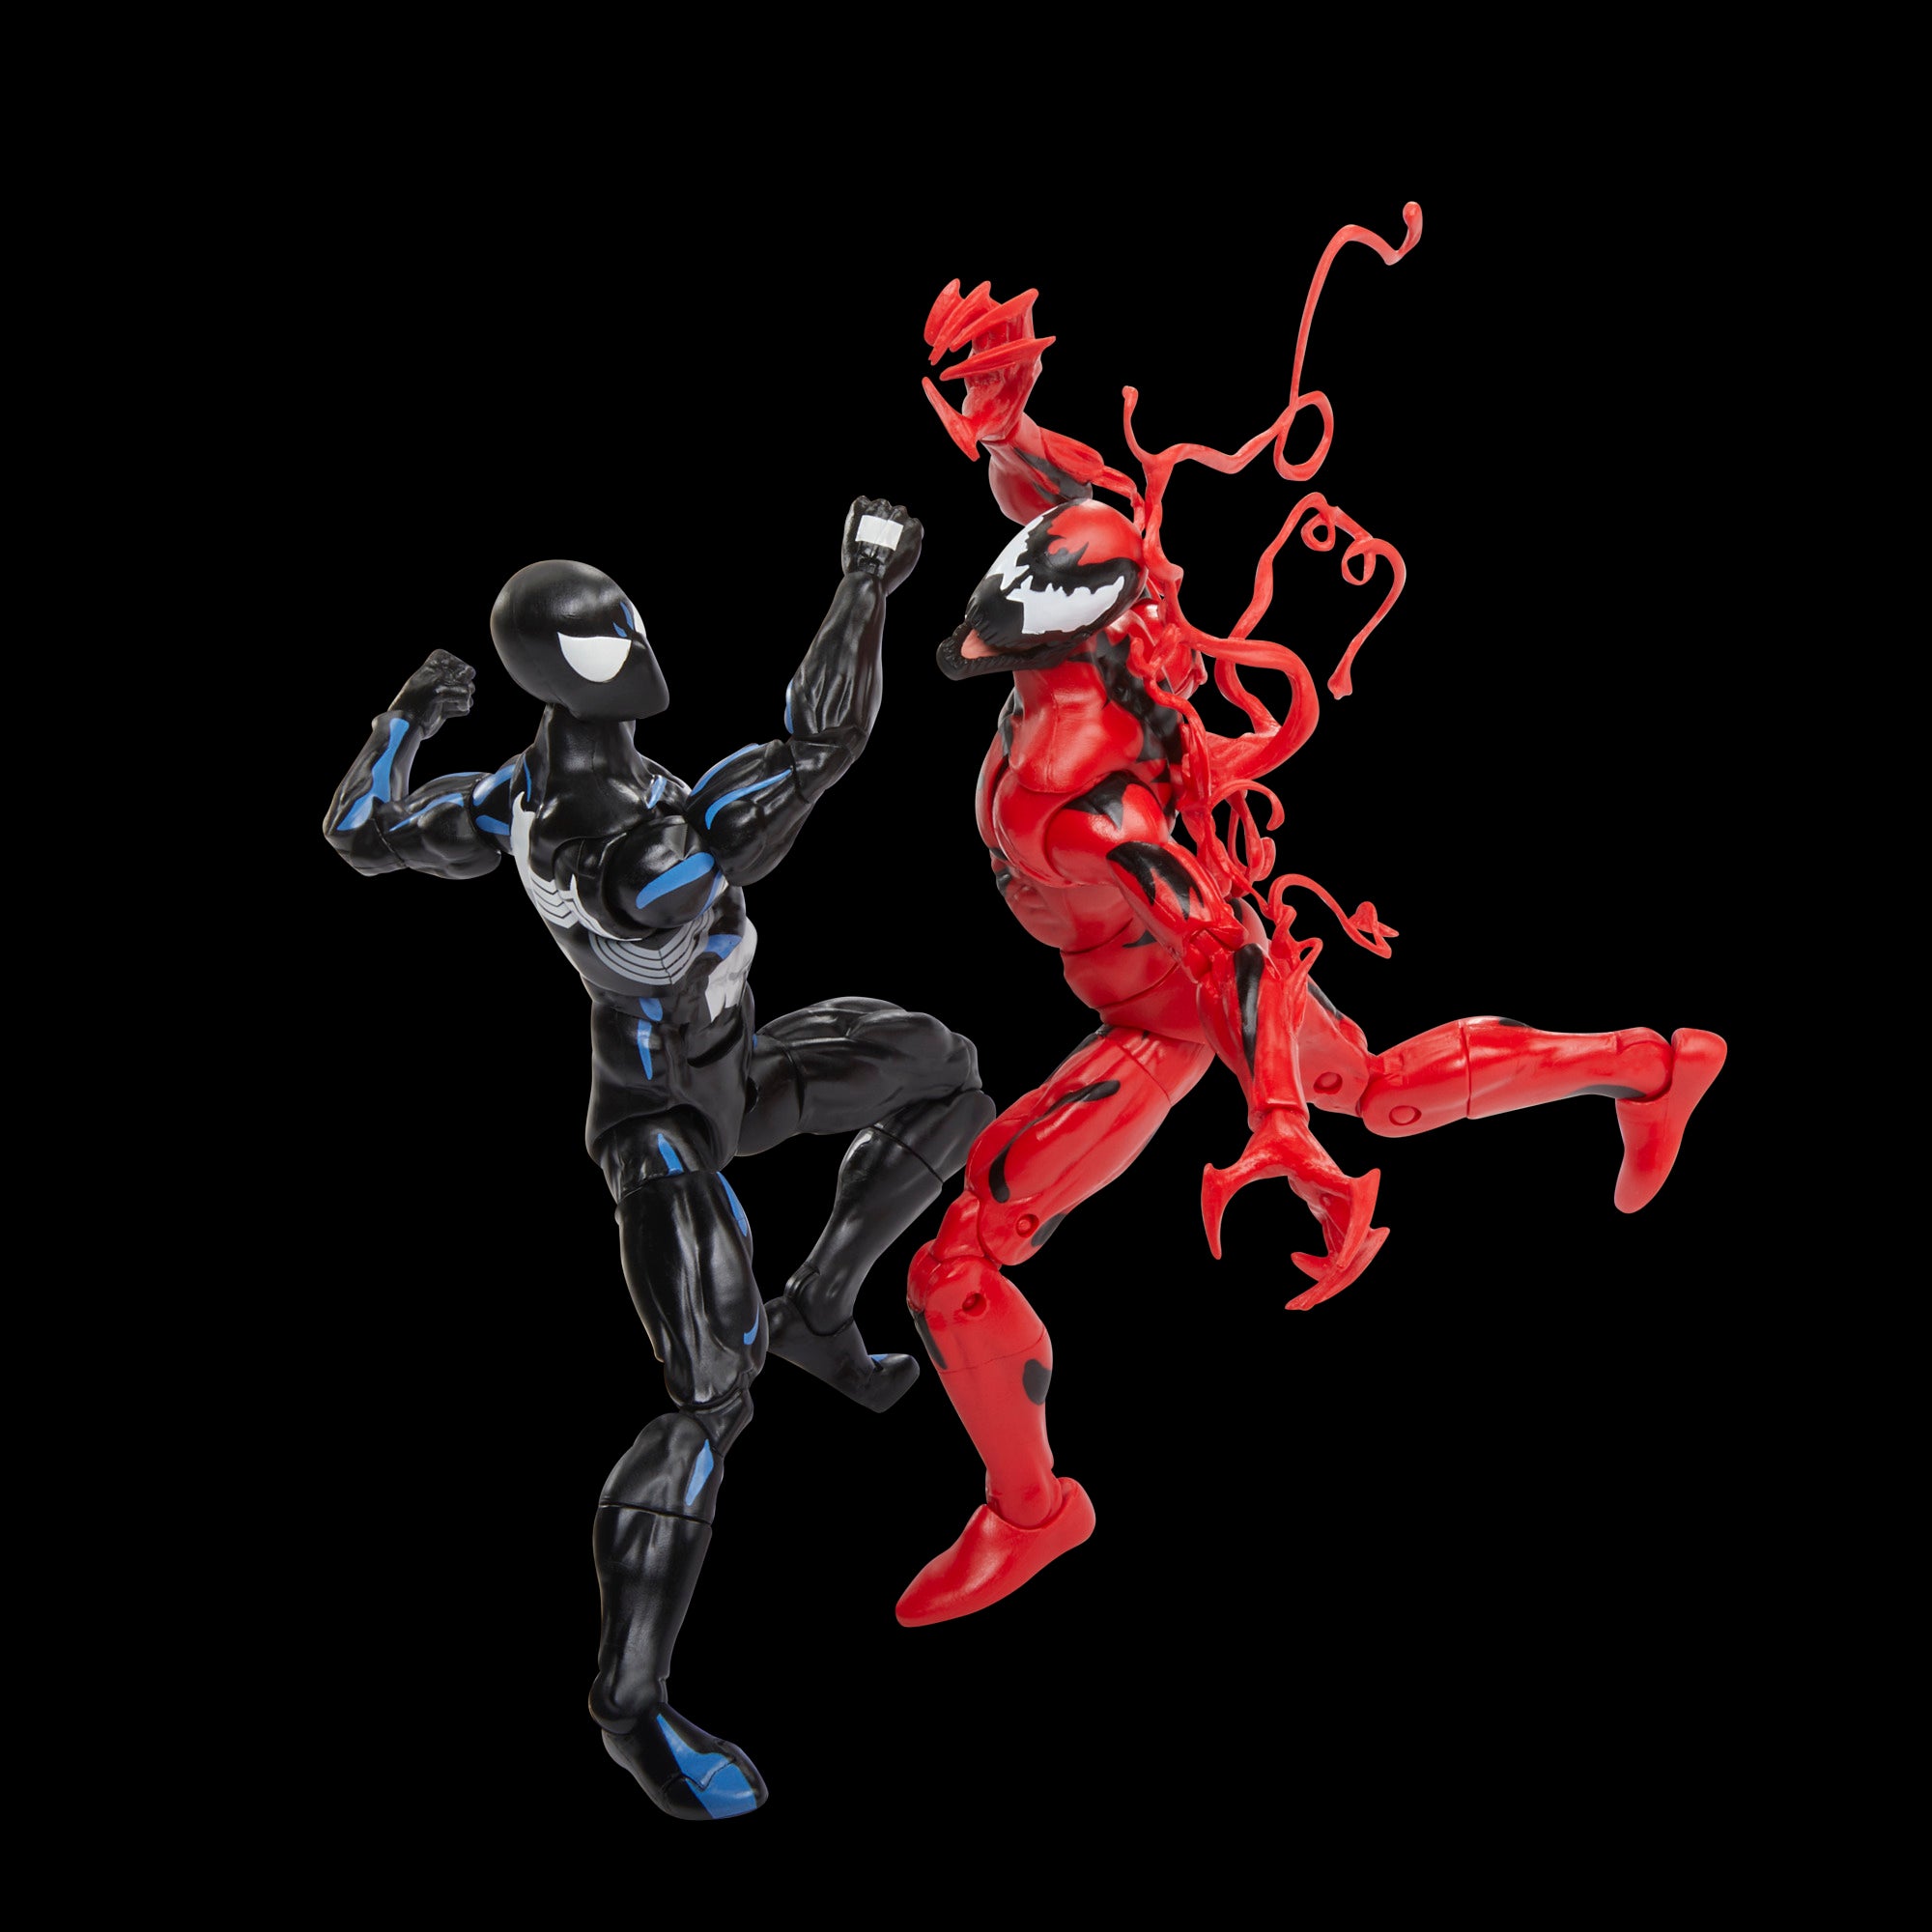 Marvel Legends Spider-Man The Animated Series Retro Black Suit Symbiote vs  Carnage Action Figure Set, 6 inch(Pack of 4)